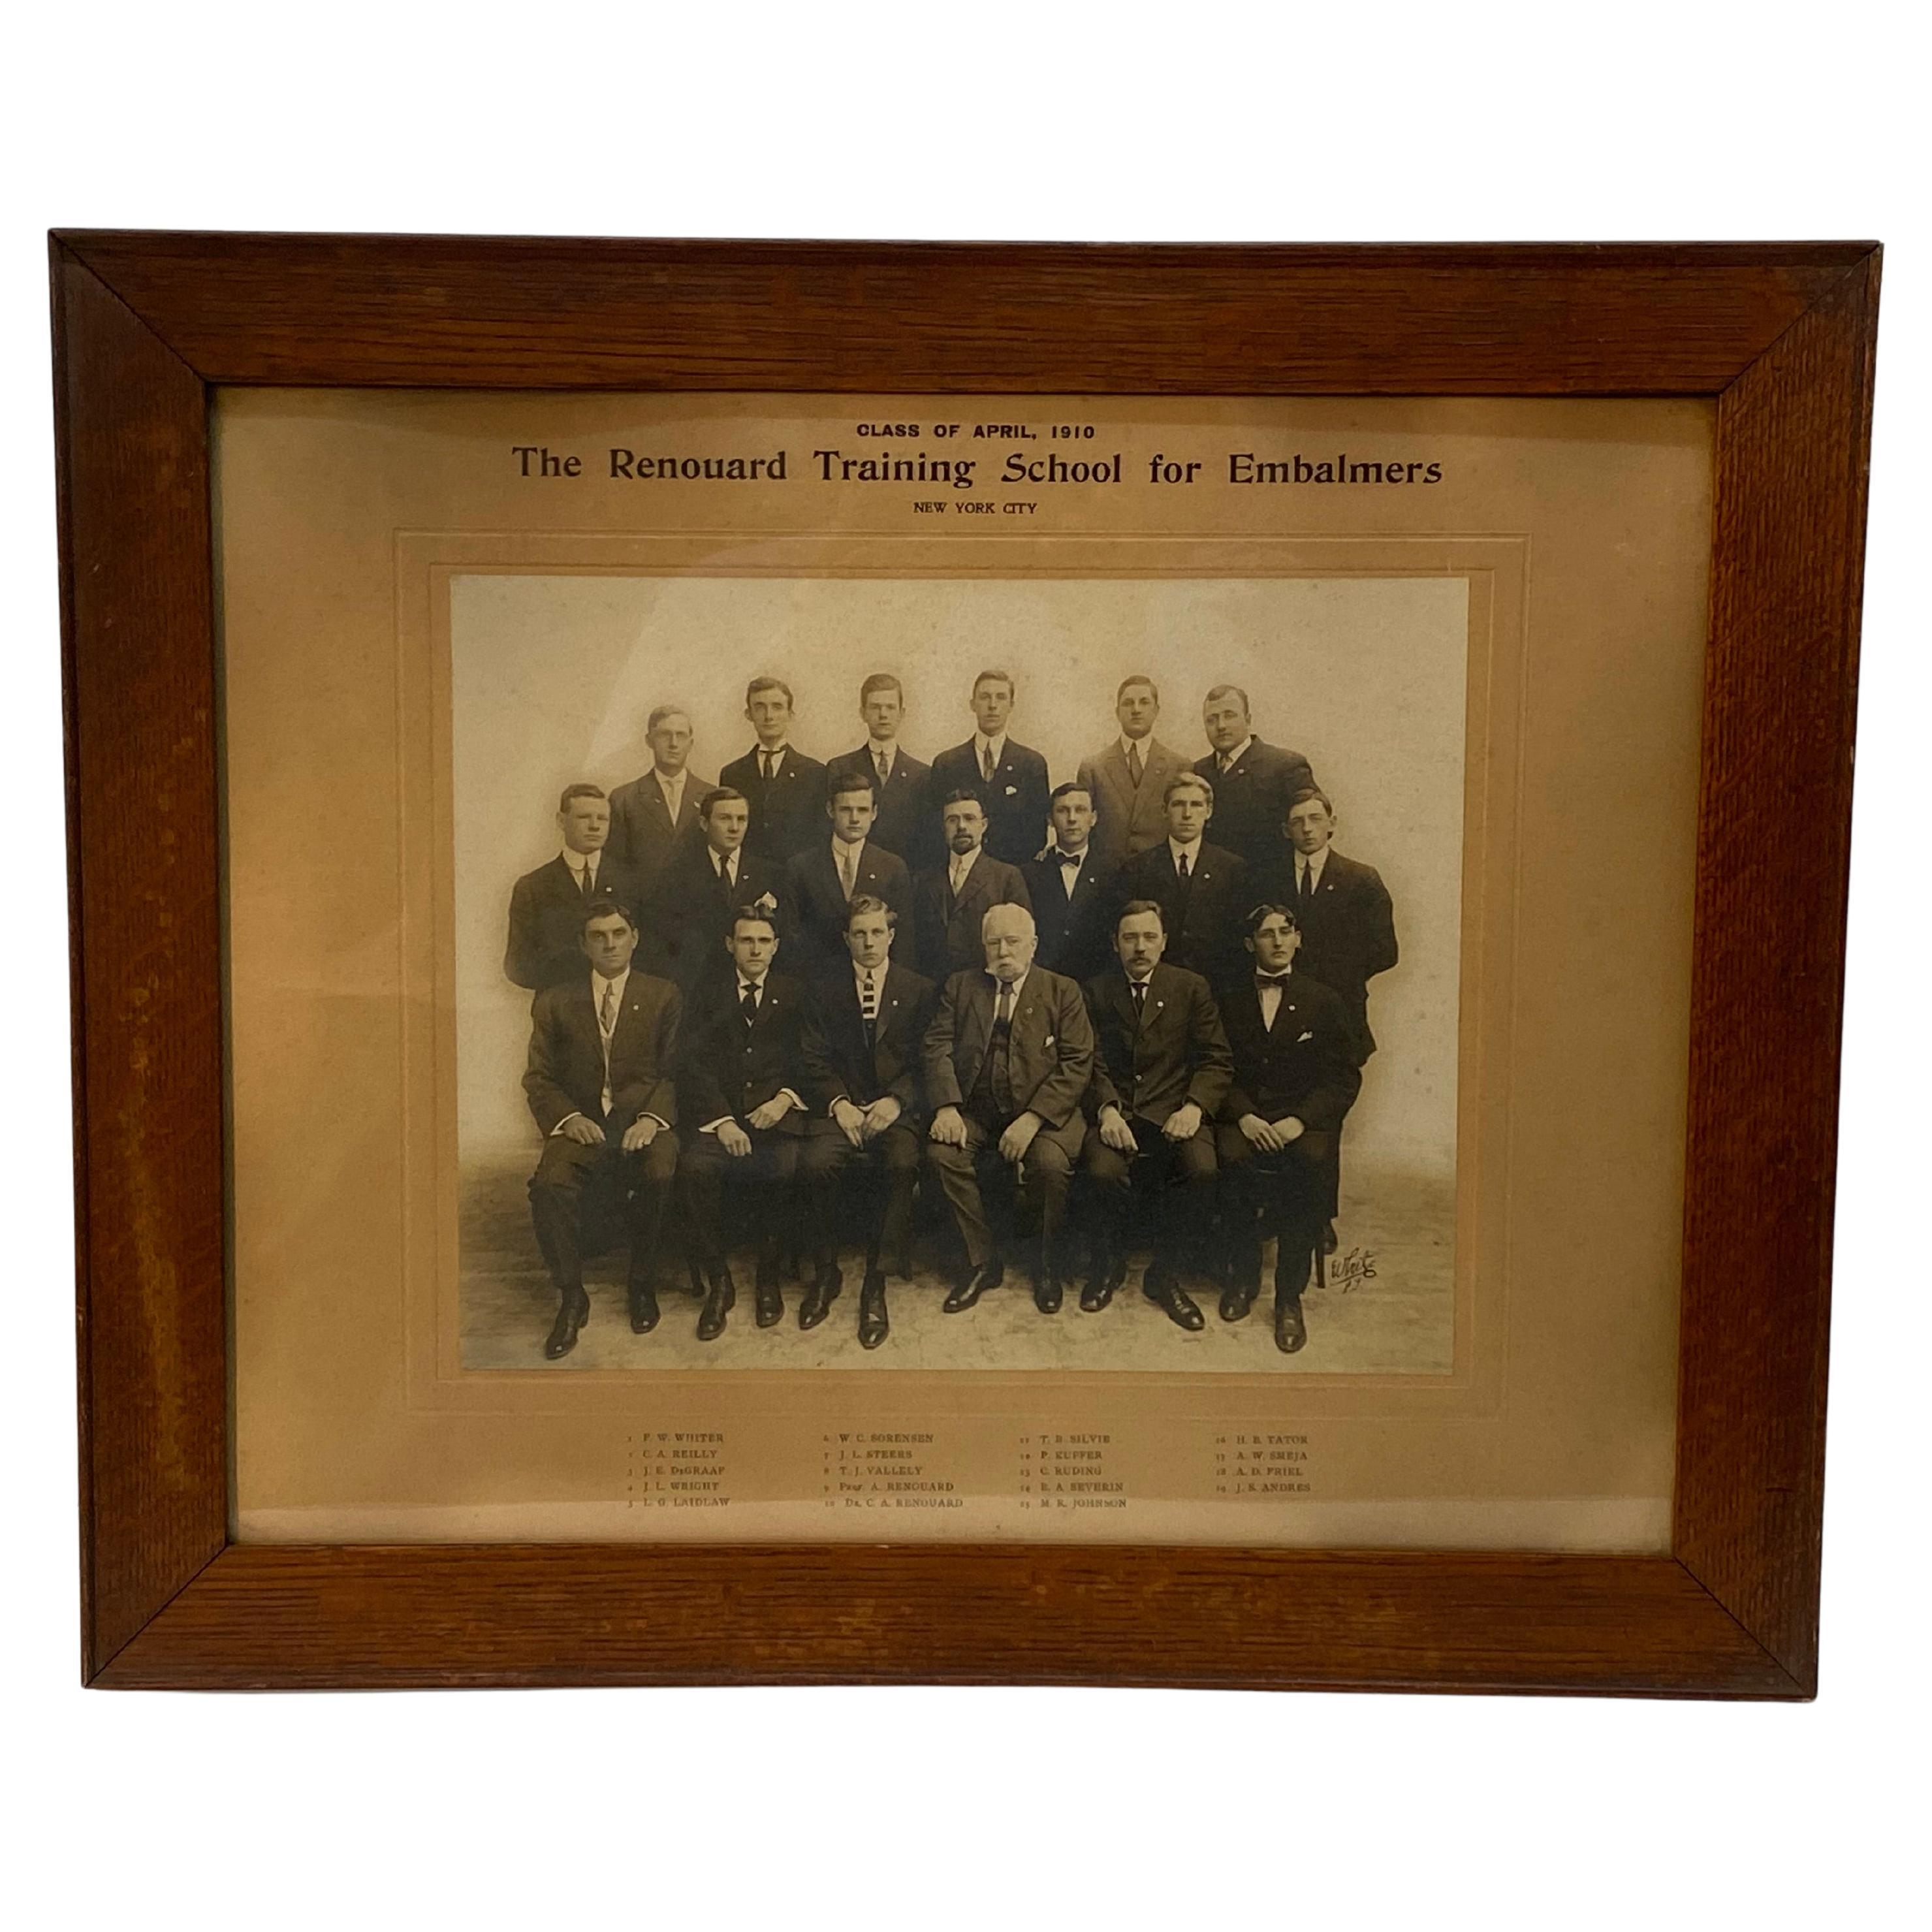 1910 Renouard Training School for Embalmers New York City Graduating Class Photo For Sale